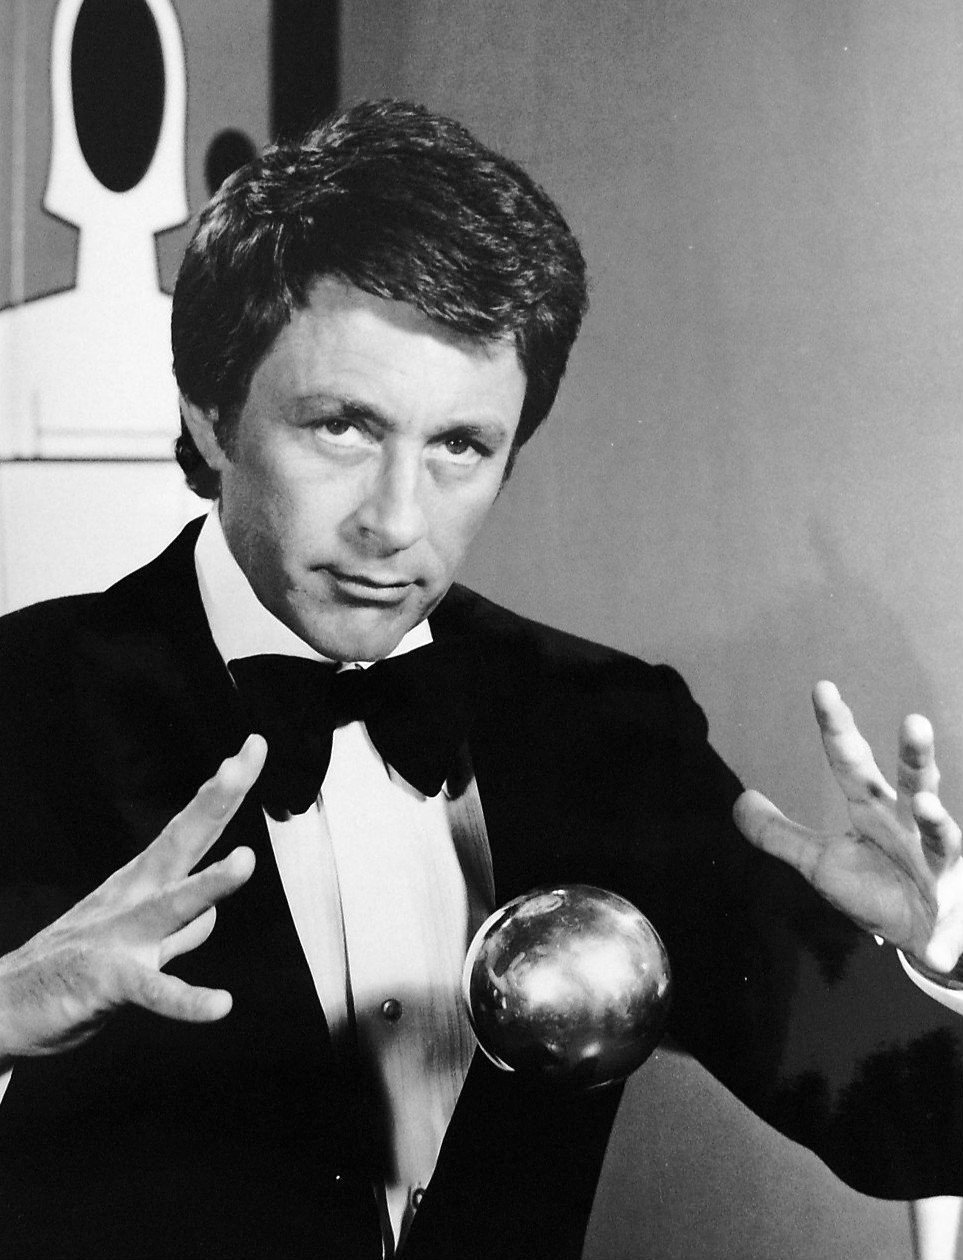 Bill Bixby as Tony Blake from the television program "The Magician" in 1973. | Source: Wikipedia.